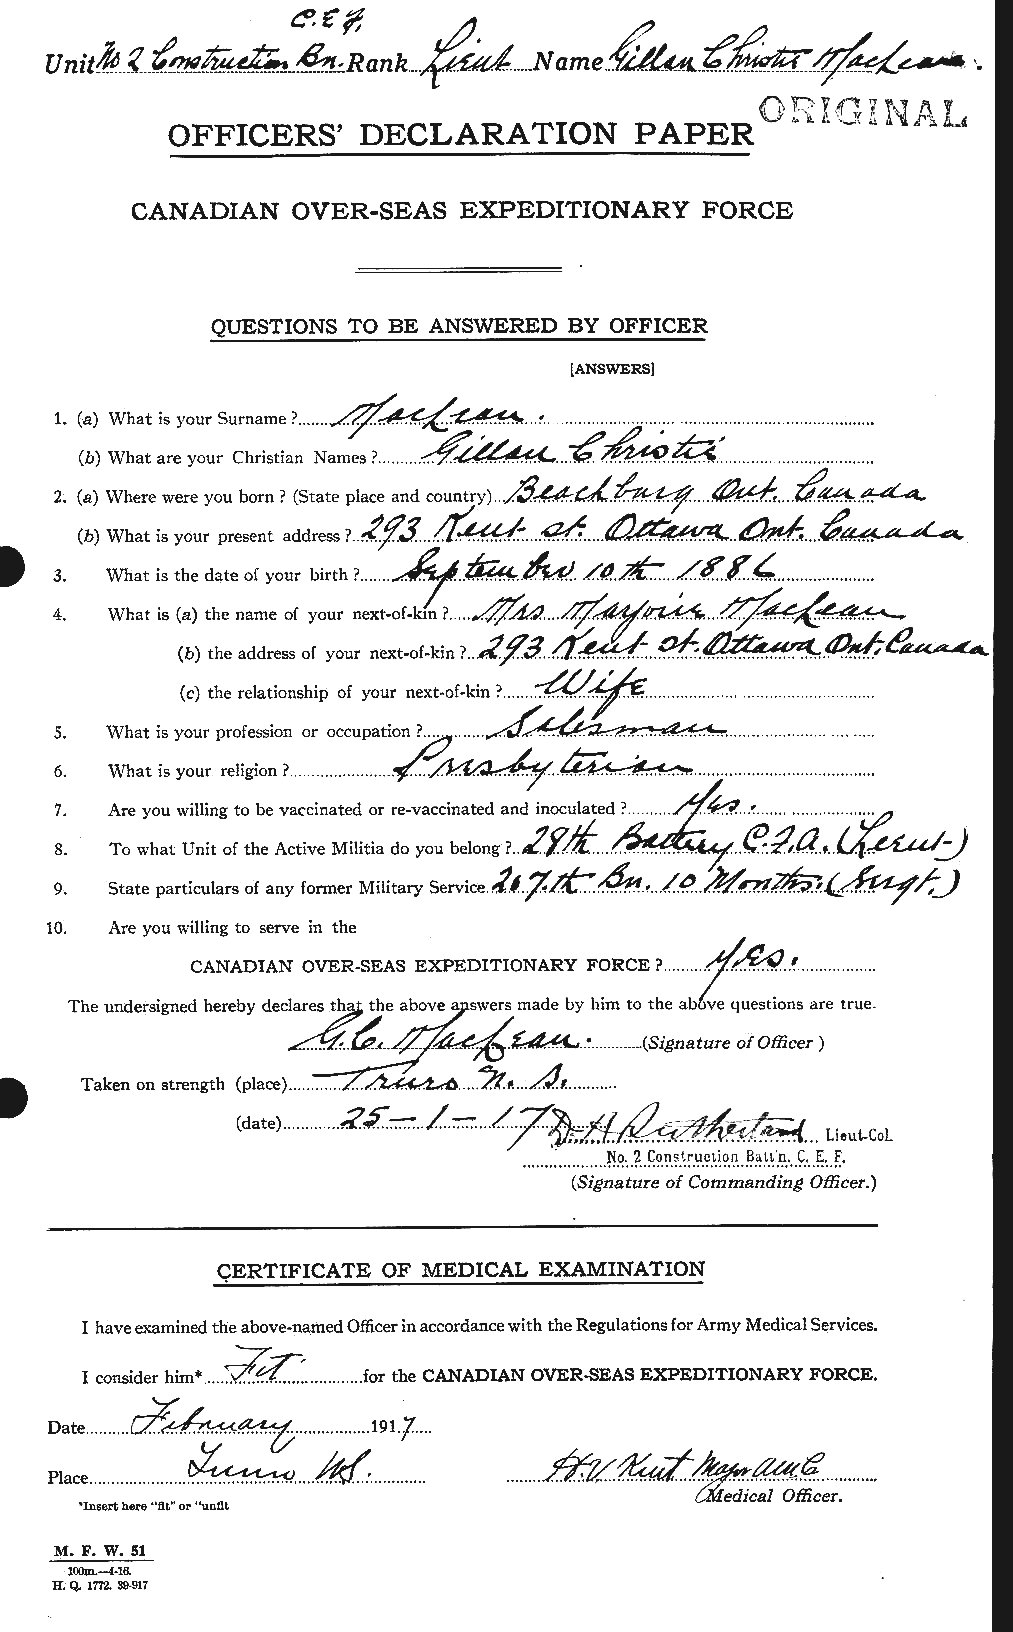 Personnel Records of the First World War - CEF 540300a